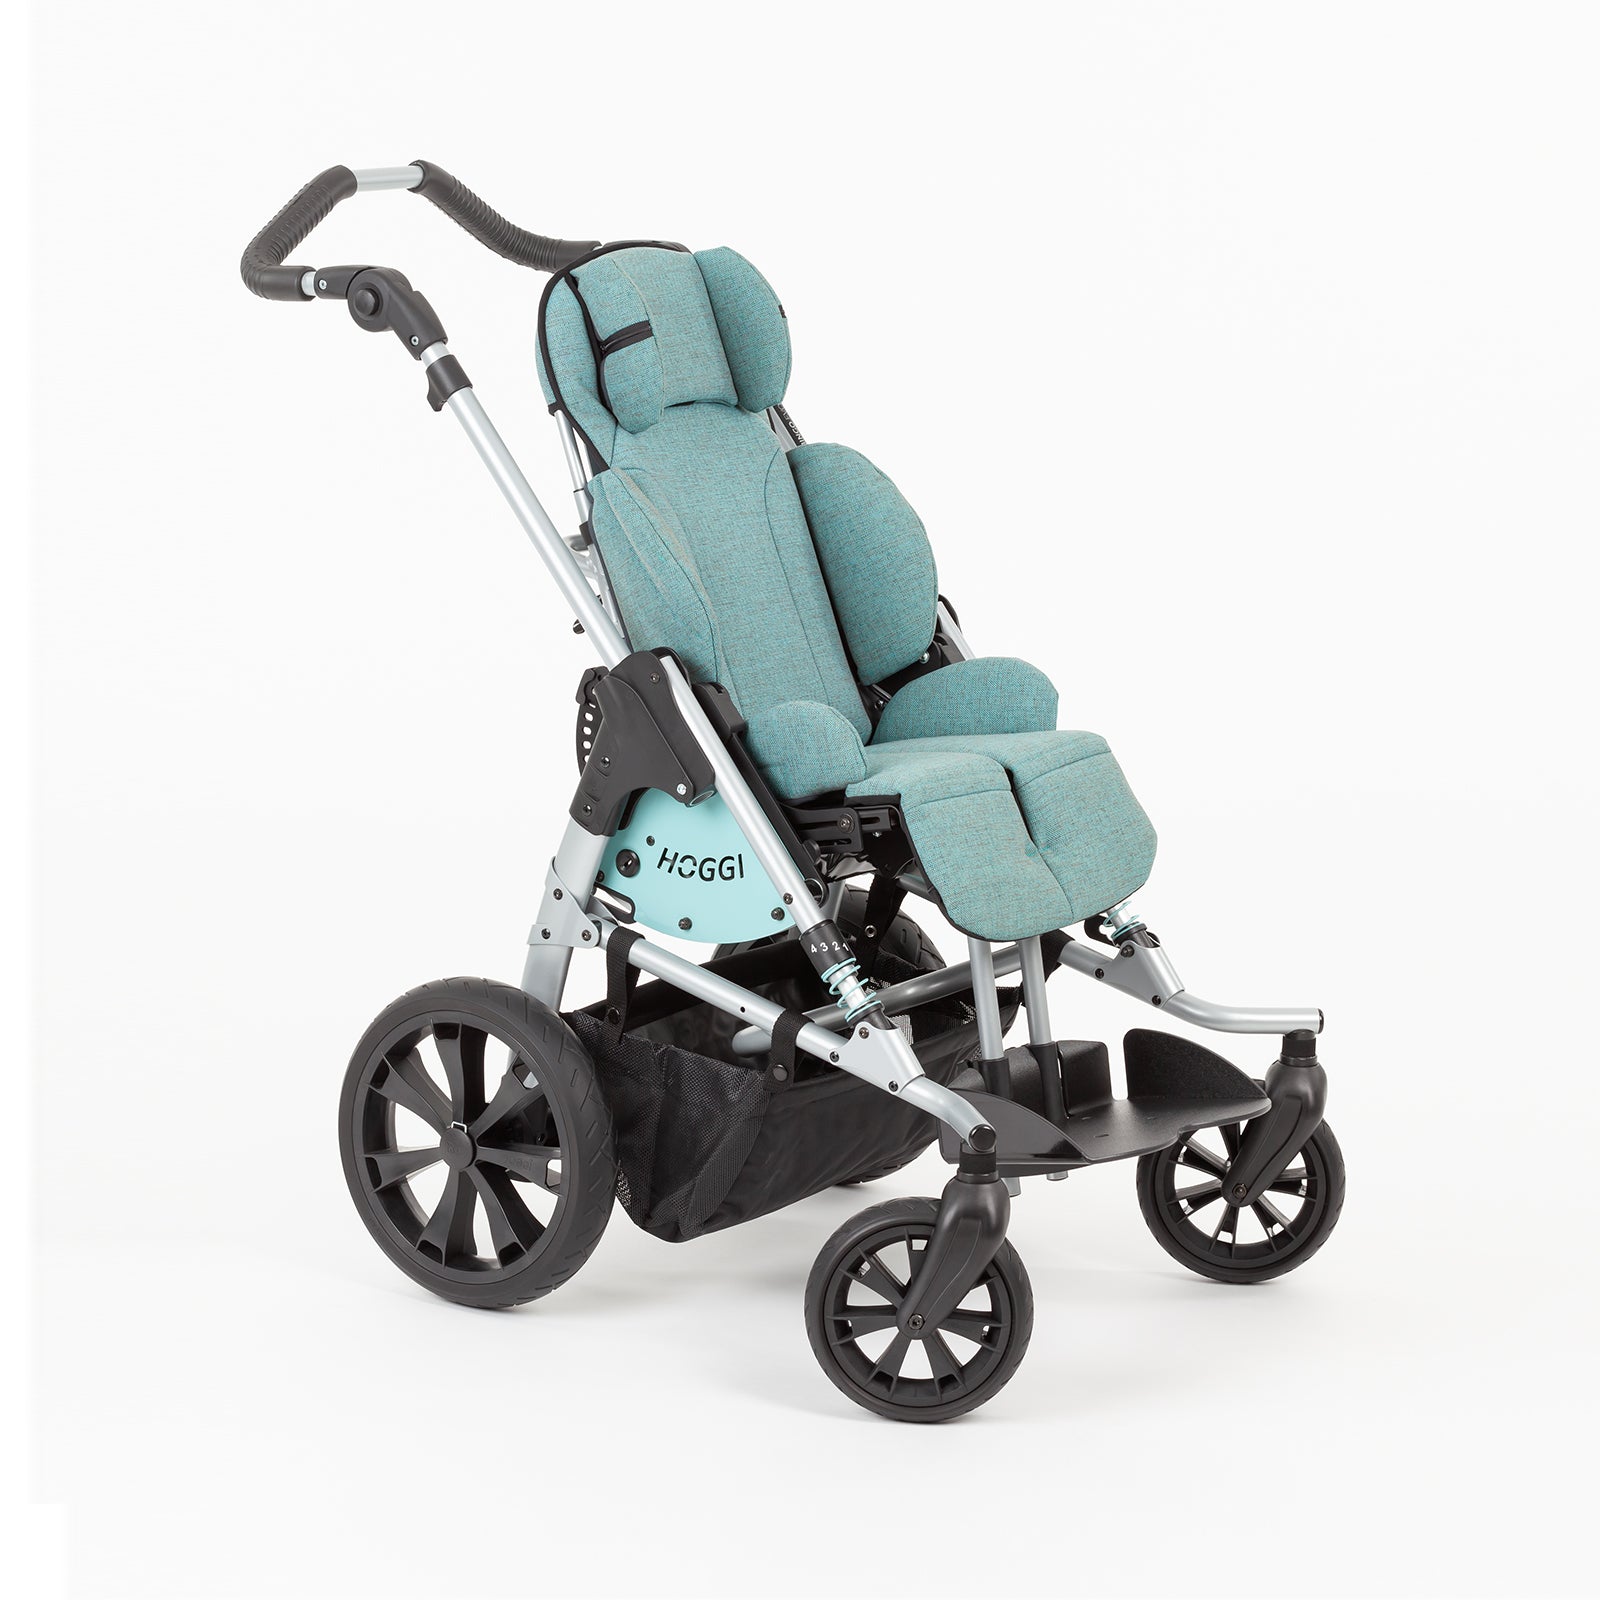 Selecting a Special Needs Stroller in Singapore